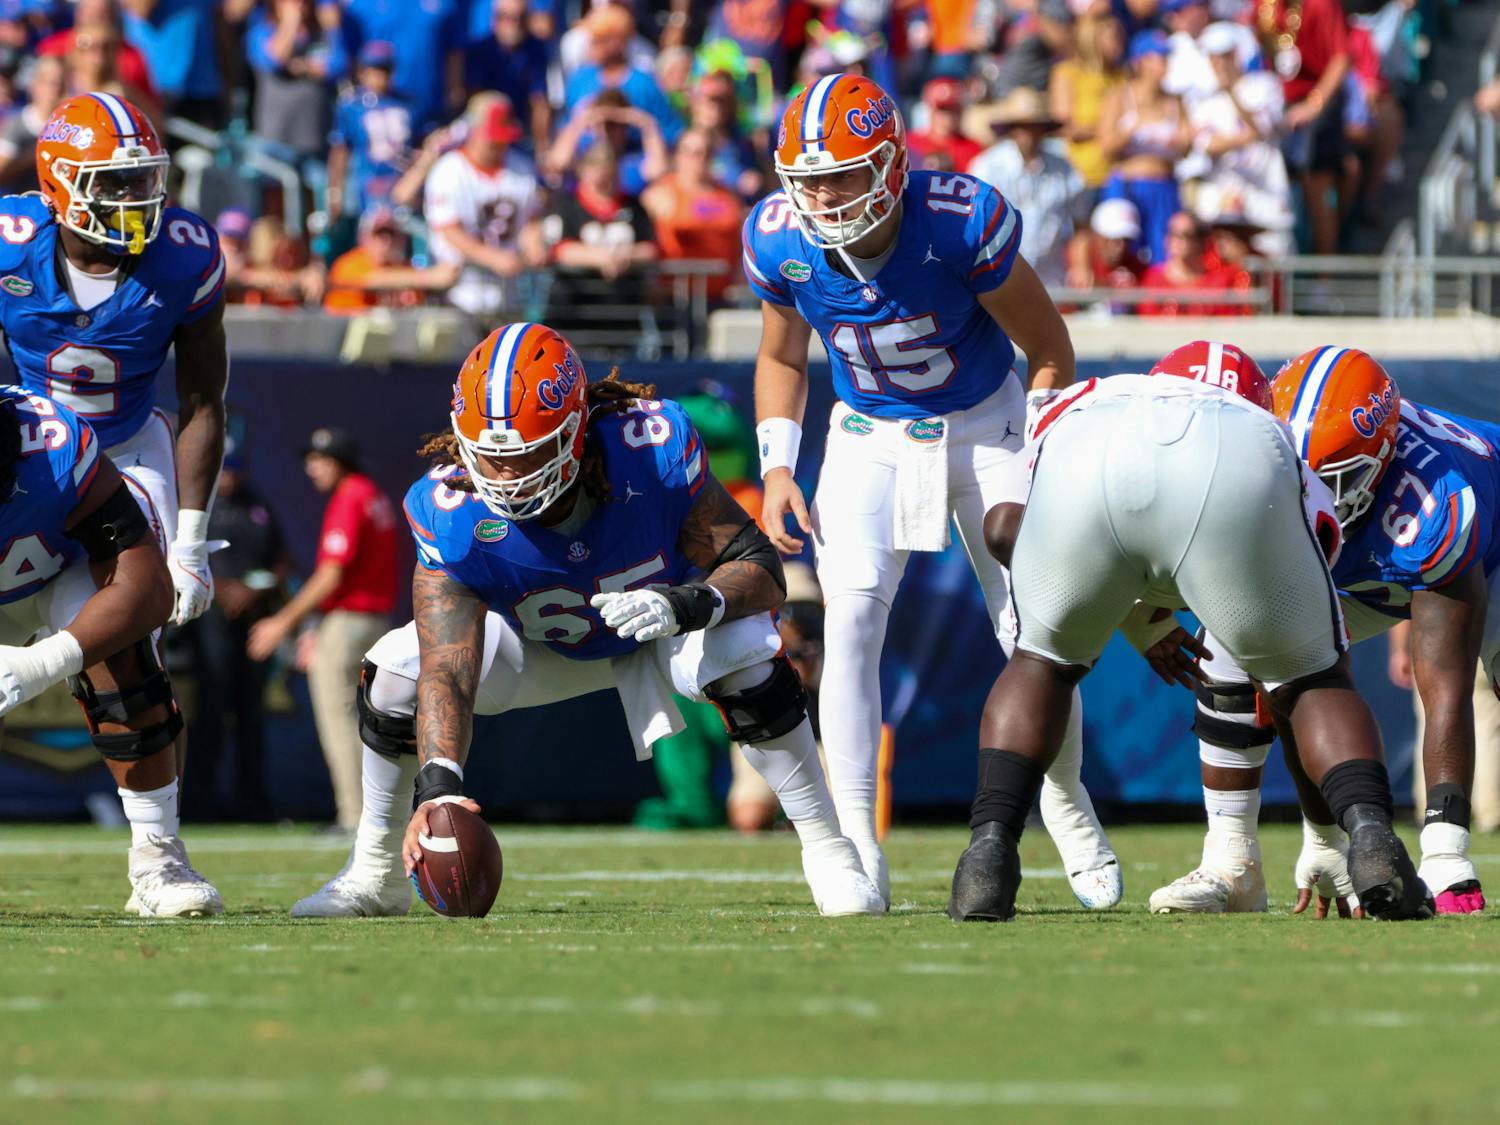 Florida center Kingsley Eguakun prepares to snap the ball in the Gators' 43-20 loss on Saturday, Oct. 28, 2023 in Jacksonville, Florida.